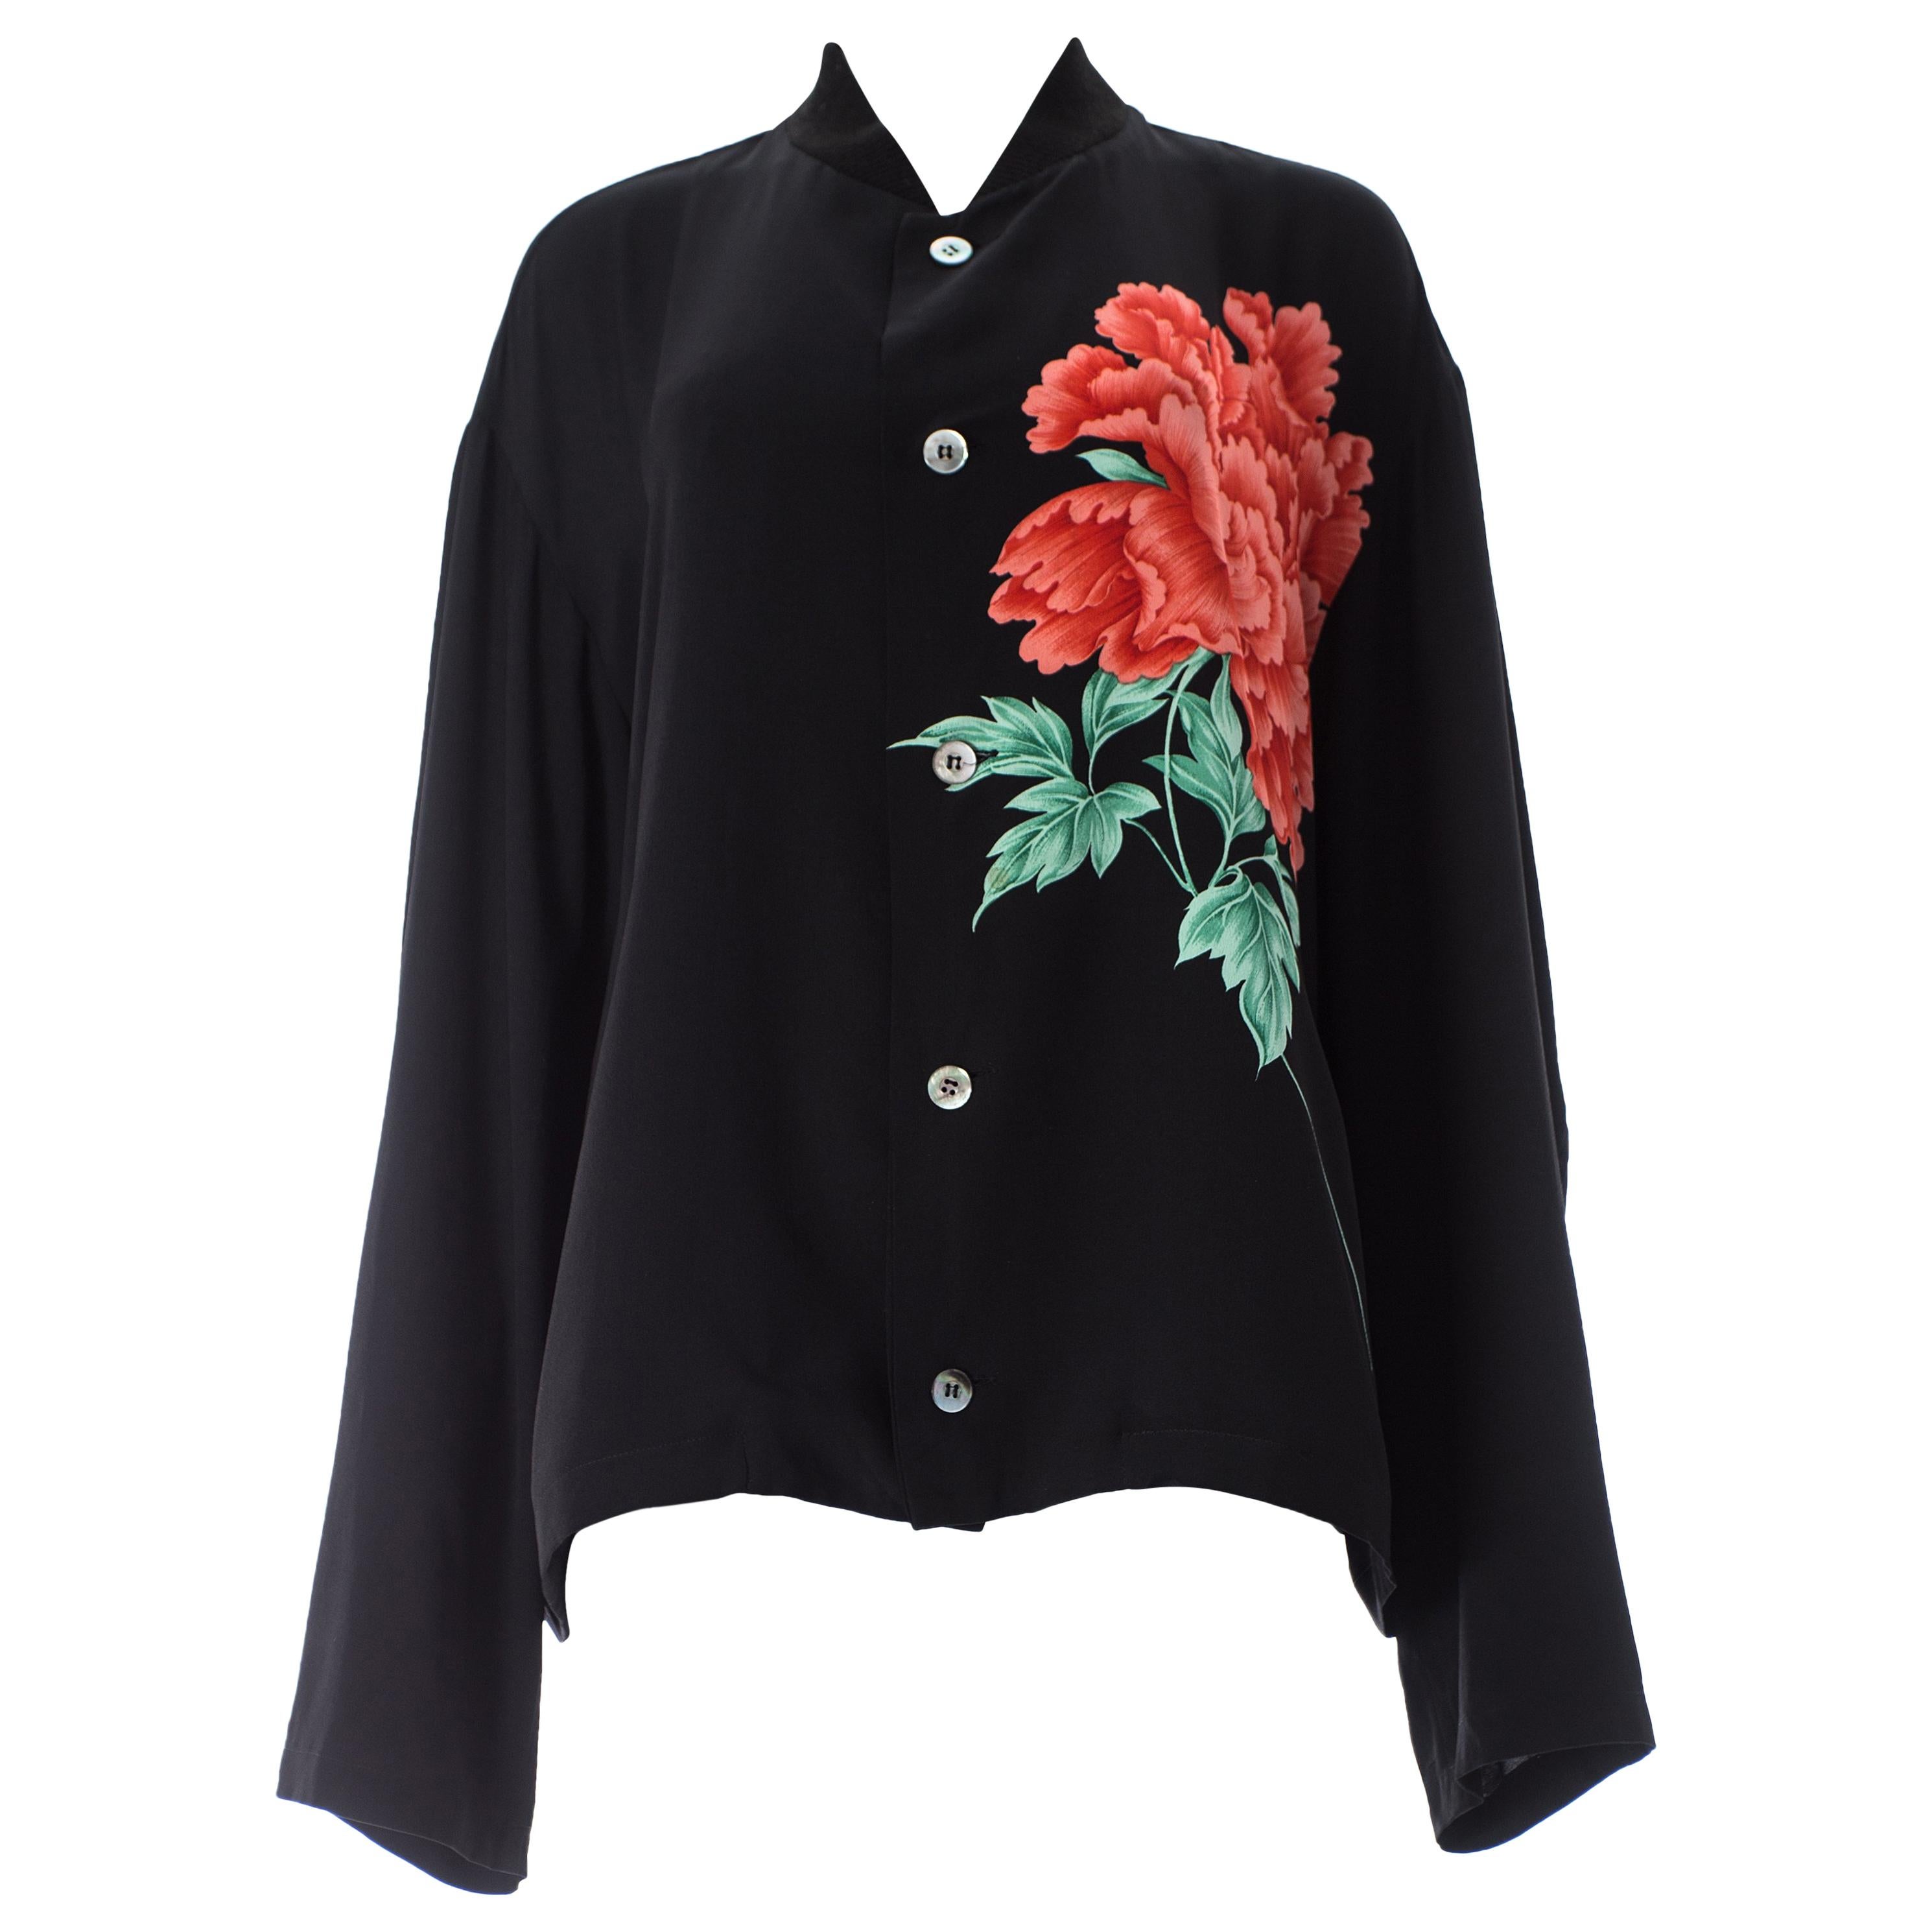 Yohji Yamamoto Pour Homme black loose cut shirt with red floral print, S/S 1996